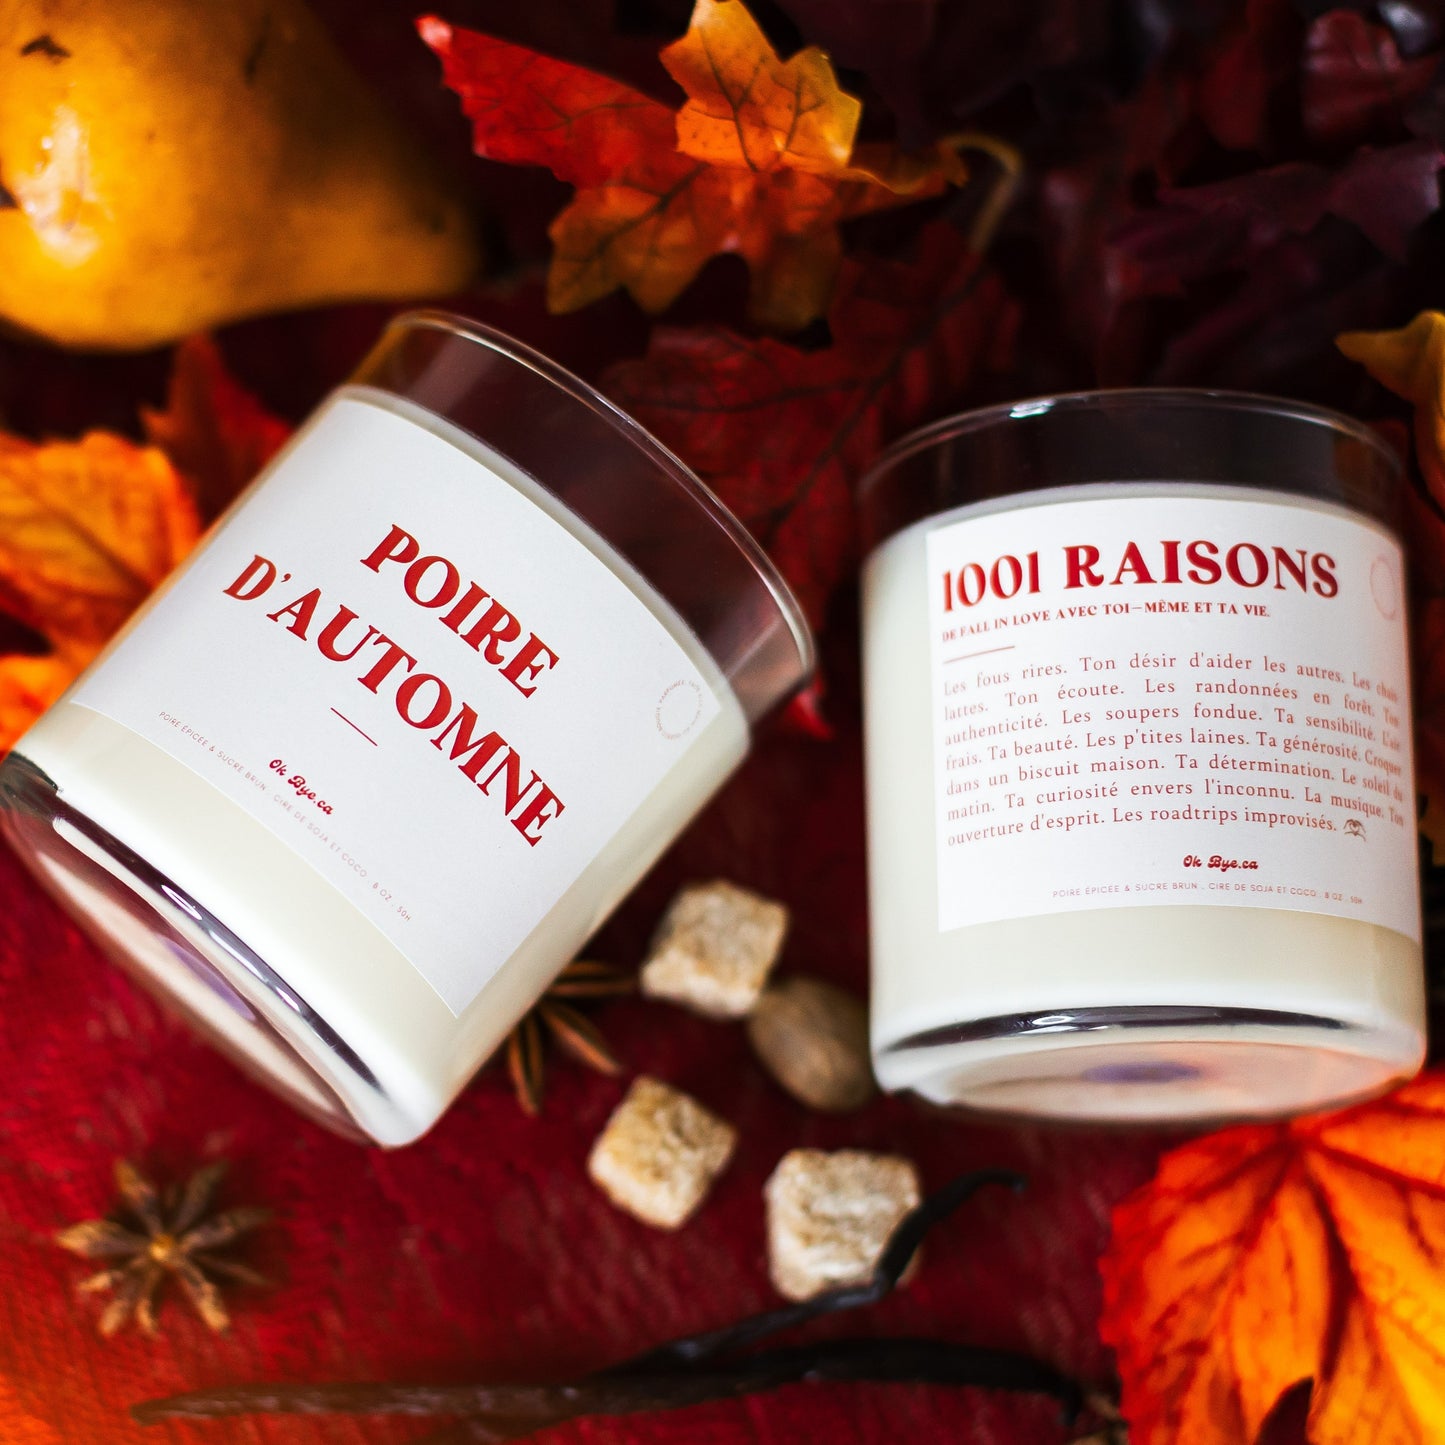 1001 reasons to fall in love with yourself, bougies de soya automne, cute captions